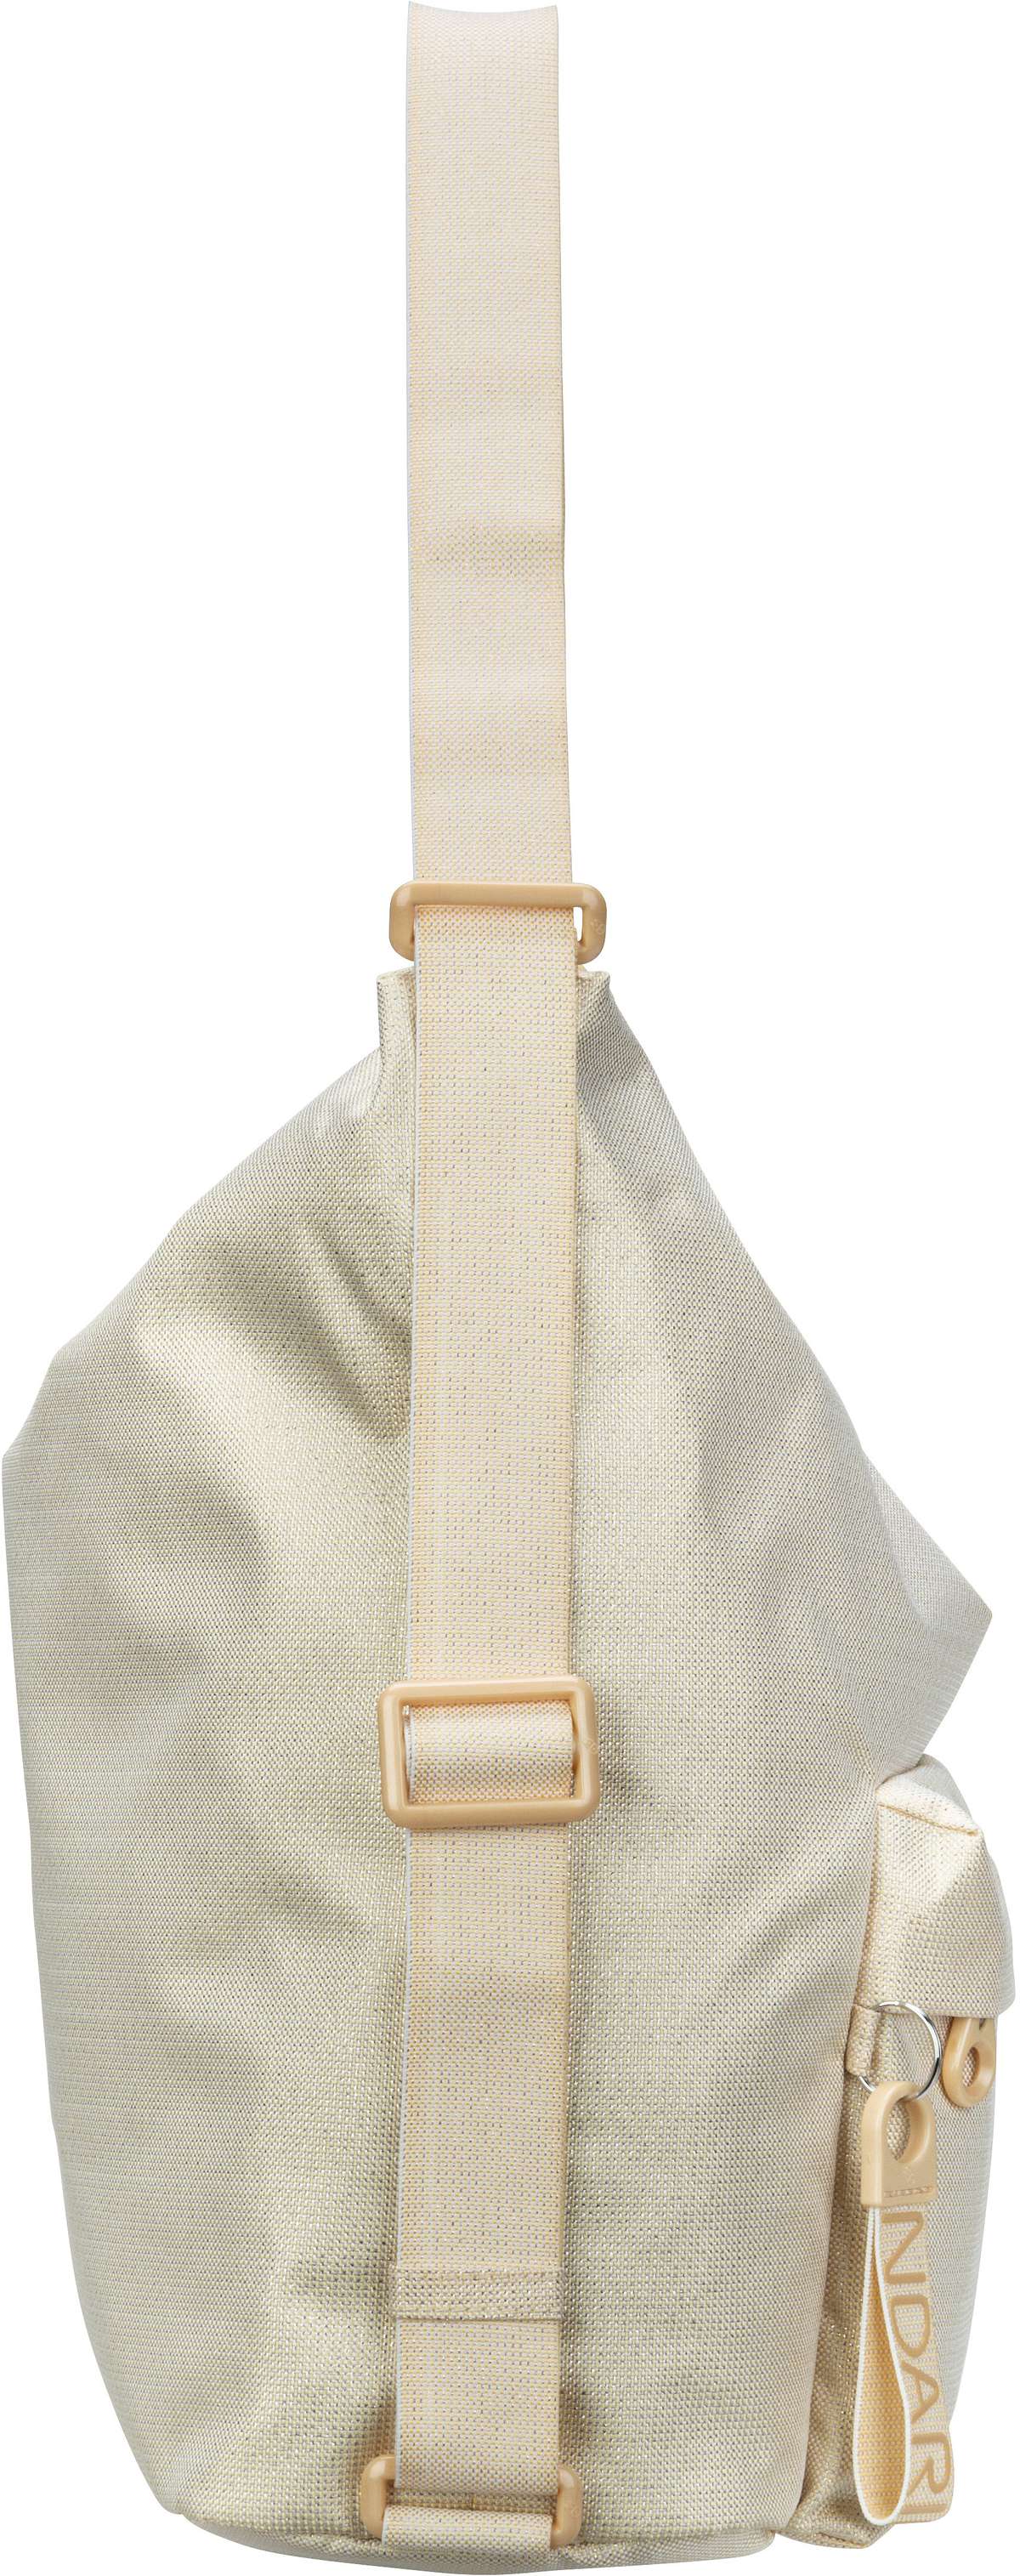 Mandarina Duck MD20 Lux Hobo Backpack QNT09 - Butter Lux